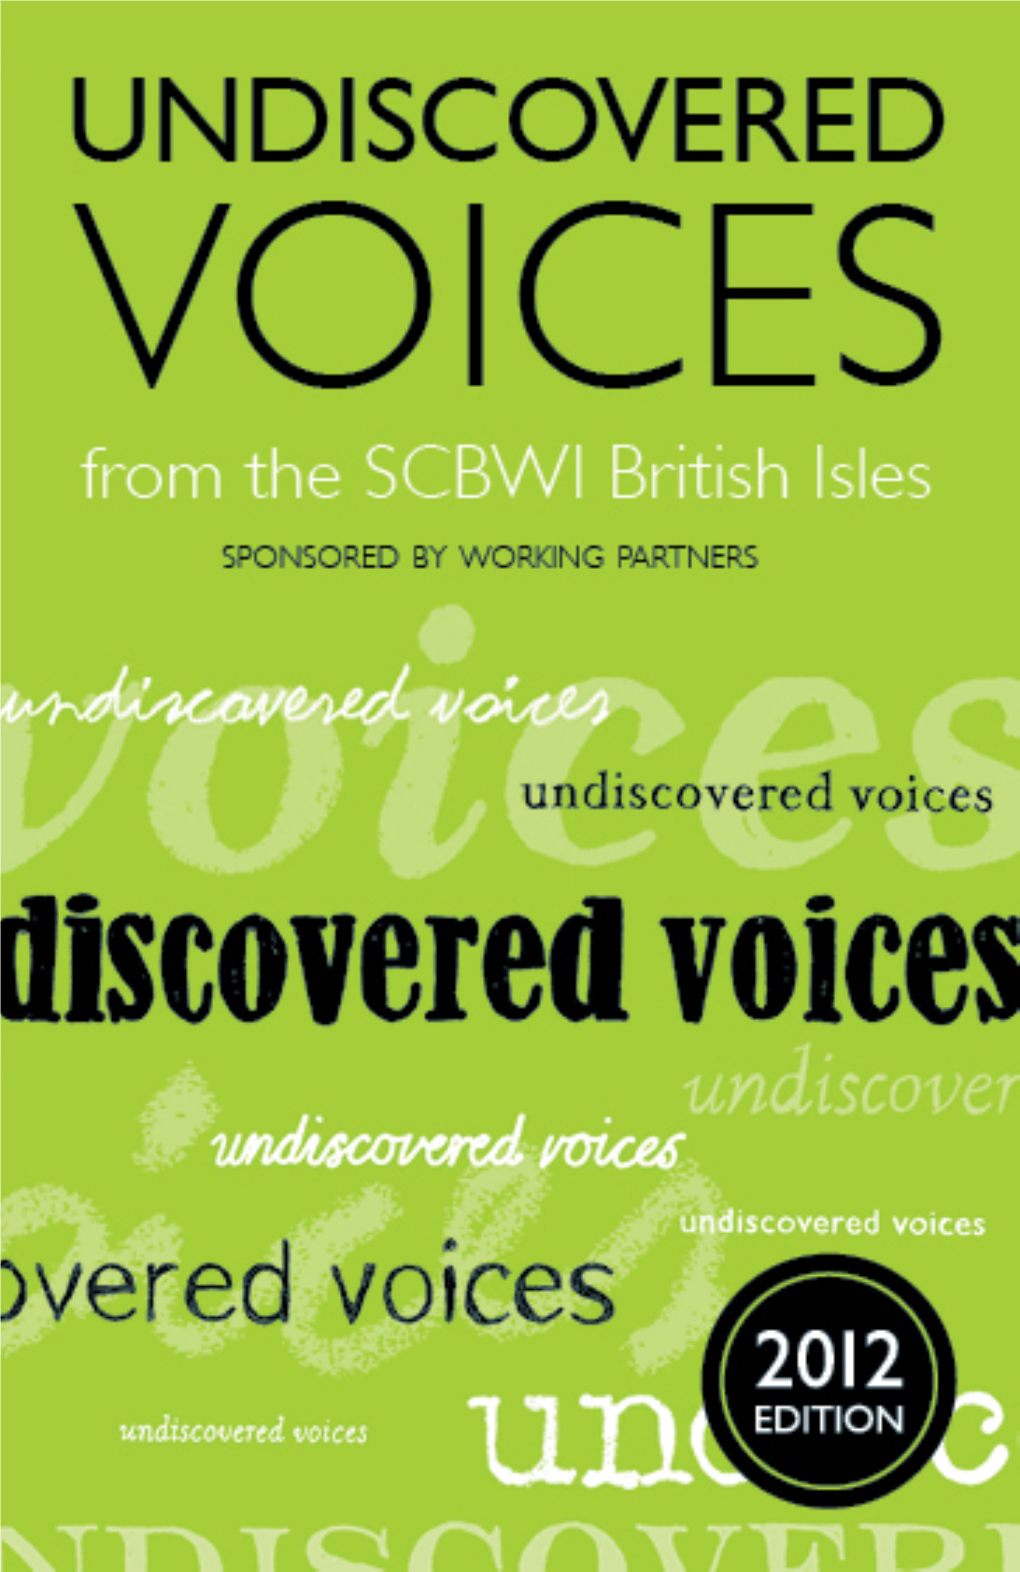 Undiscovered Voices 2012 Digital Edition